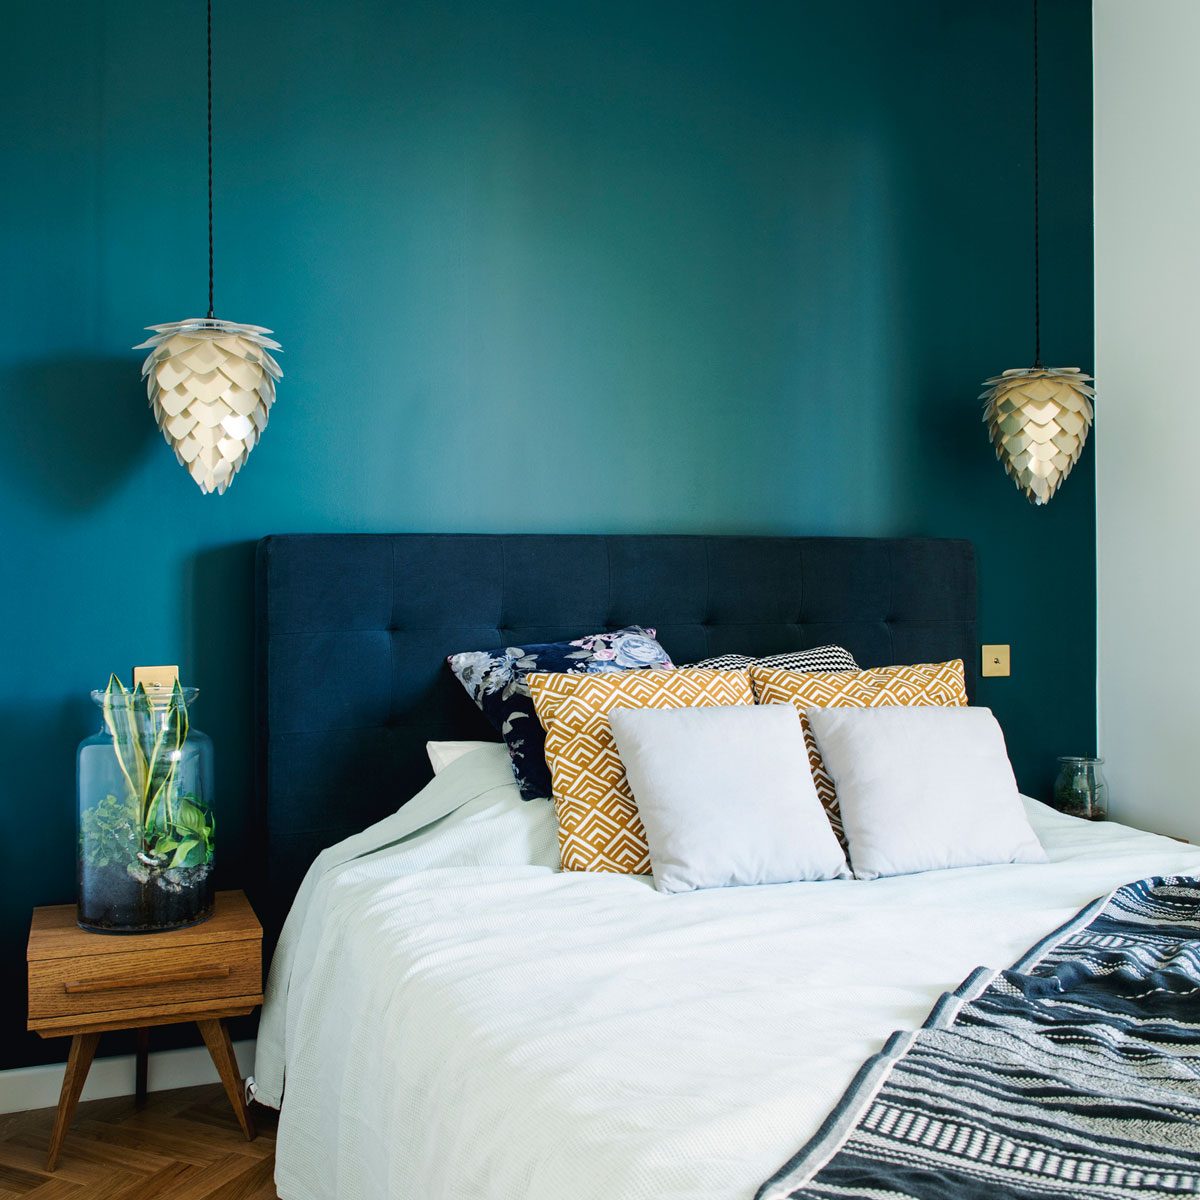 Bedroom with a deep teal accent wall